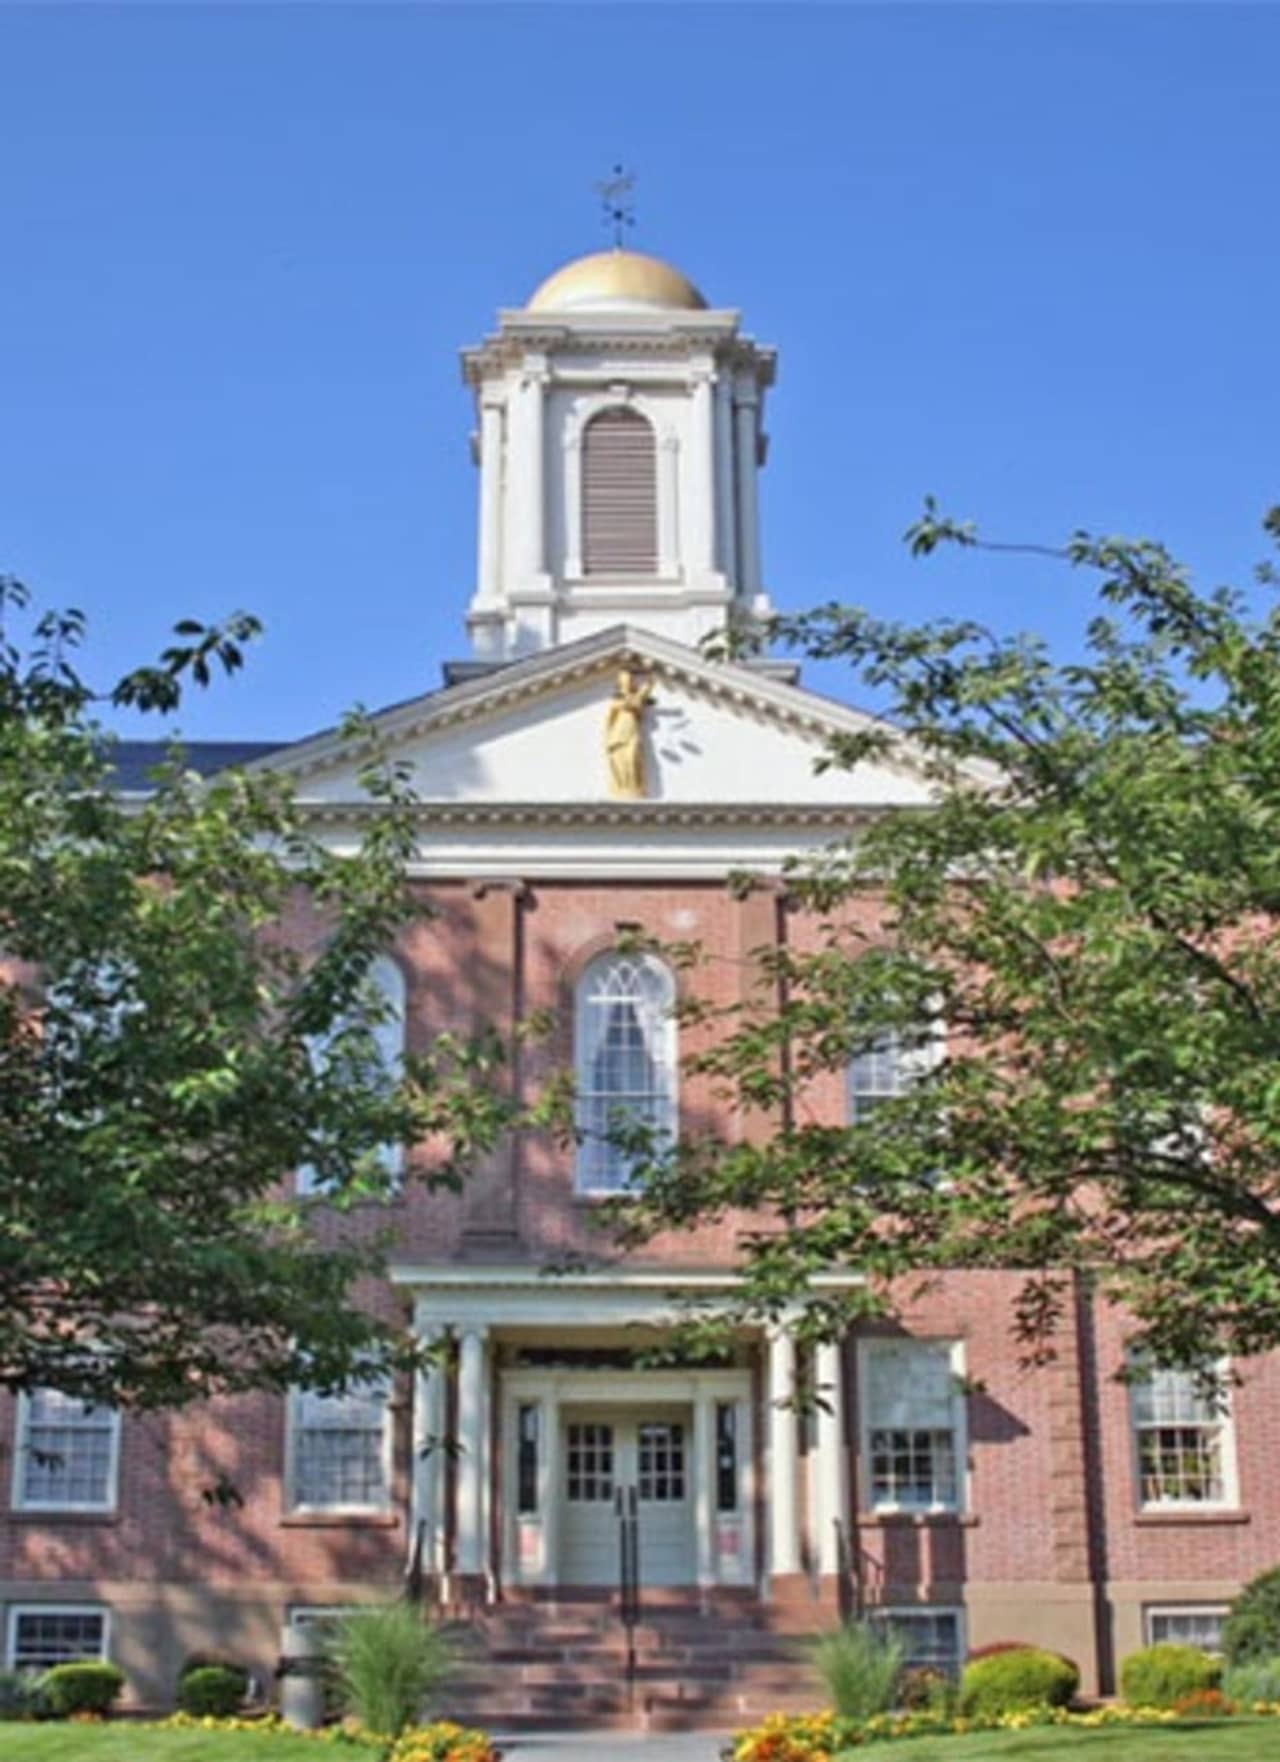 Morris County Courthouse